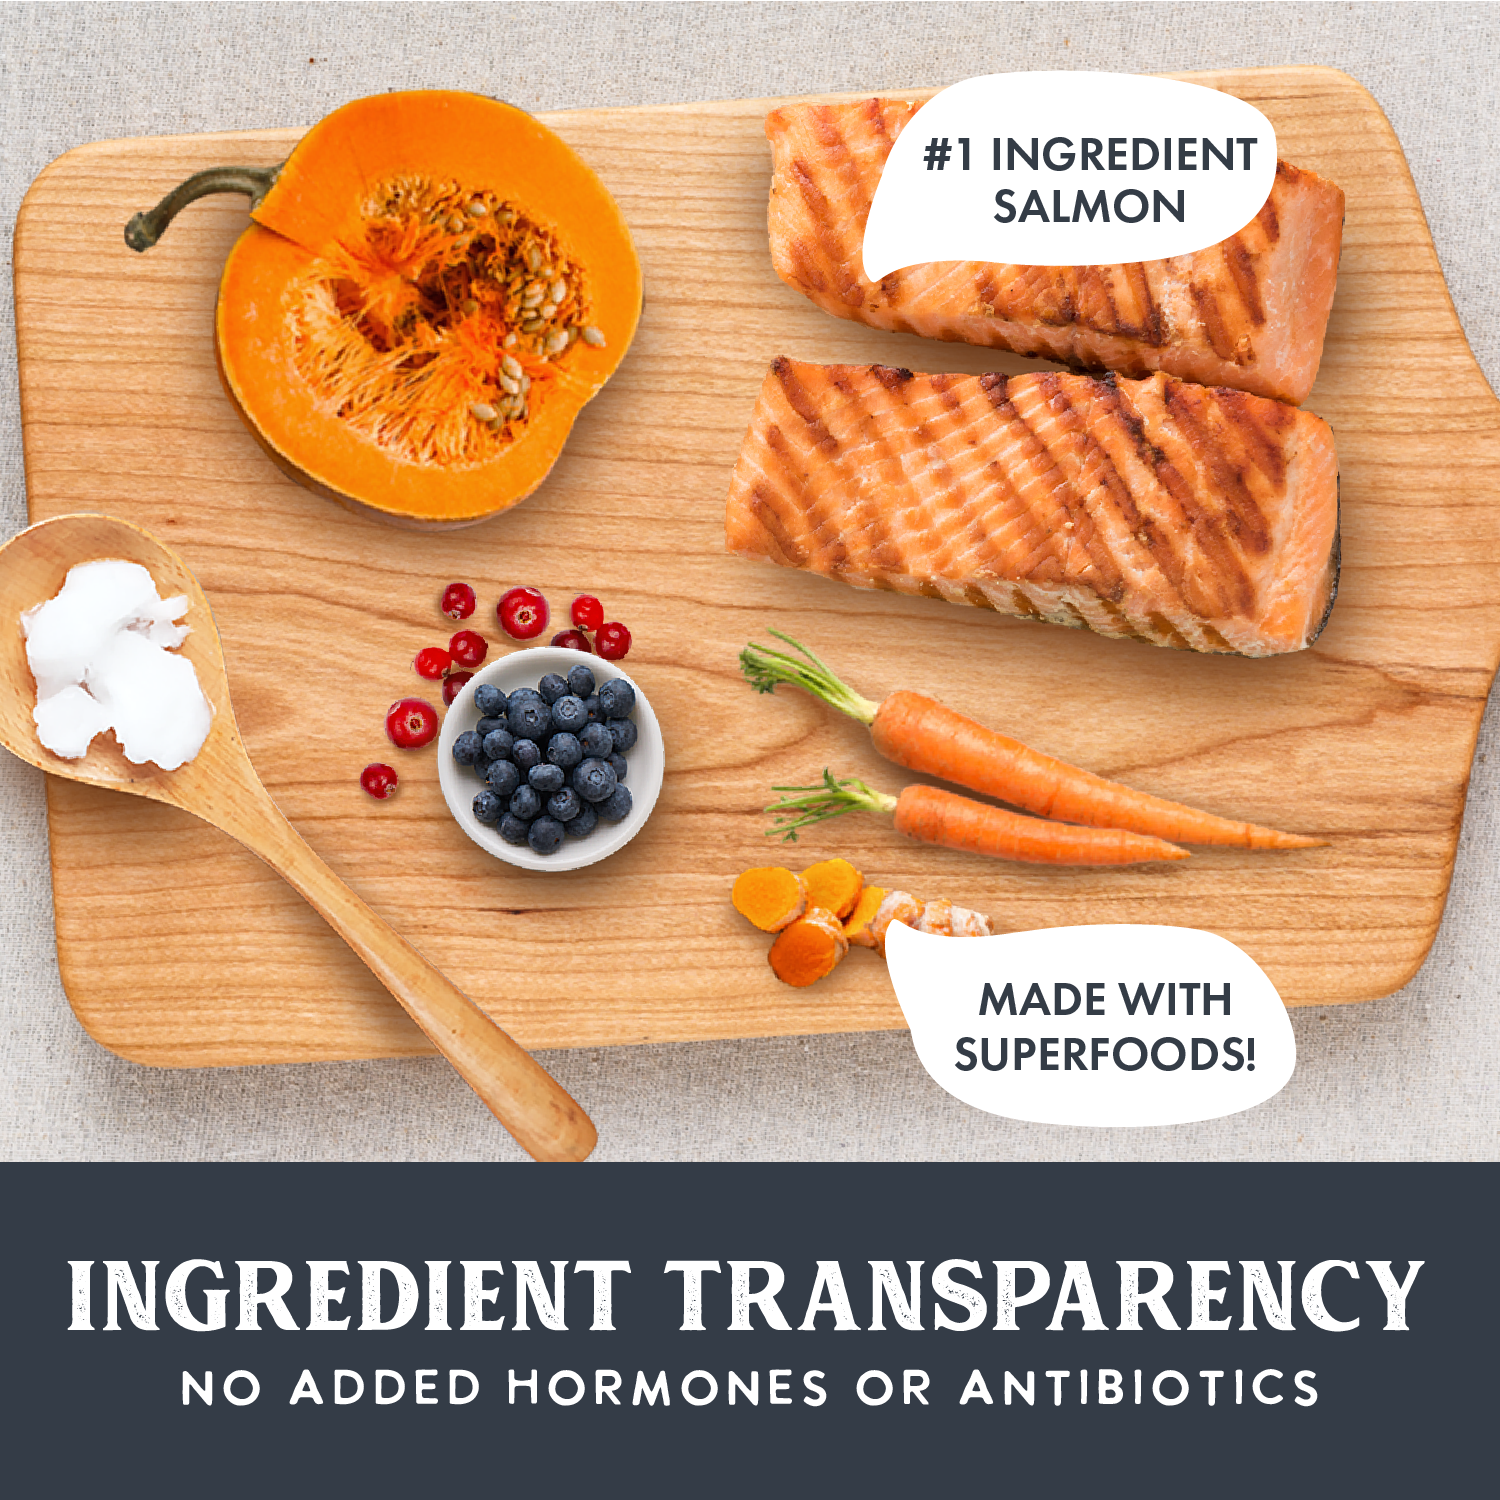 Health Extension Air Dried Salmon photo of ingredients: 1st ingredient is Salmon